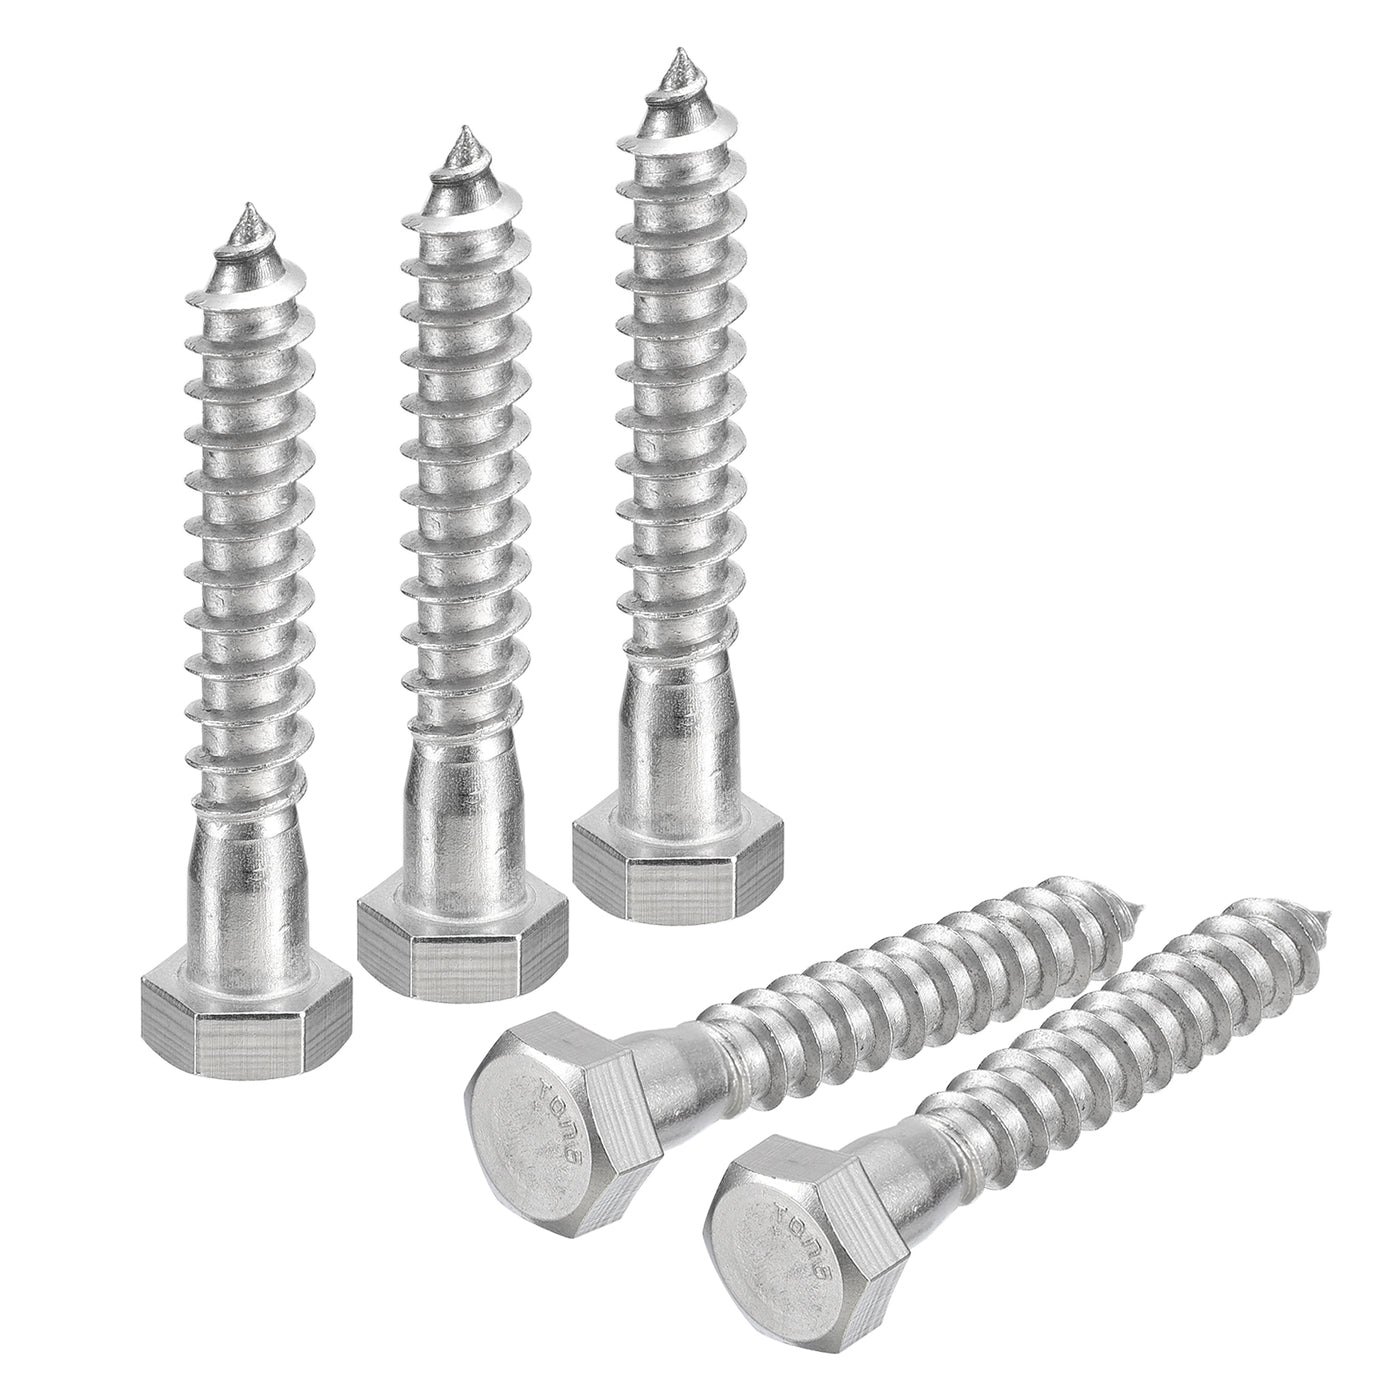 uxcell Uxcell Hex Head Lag Screws Bolts, 20pcs 3/8" x 2-1/2" 304 Stainless Steel Wood Screws